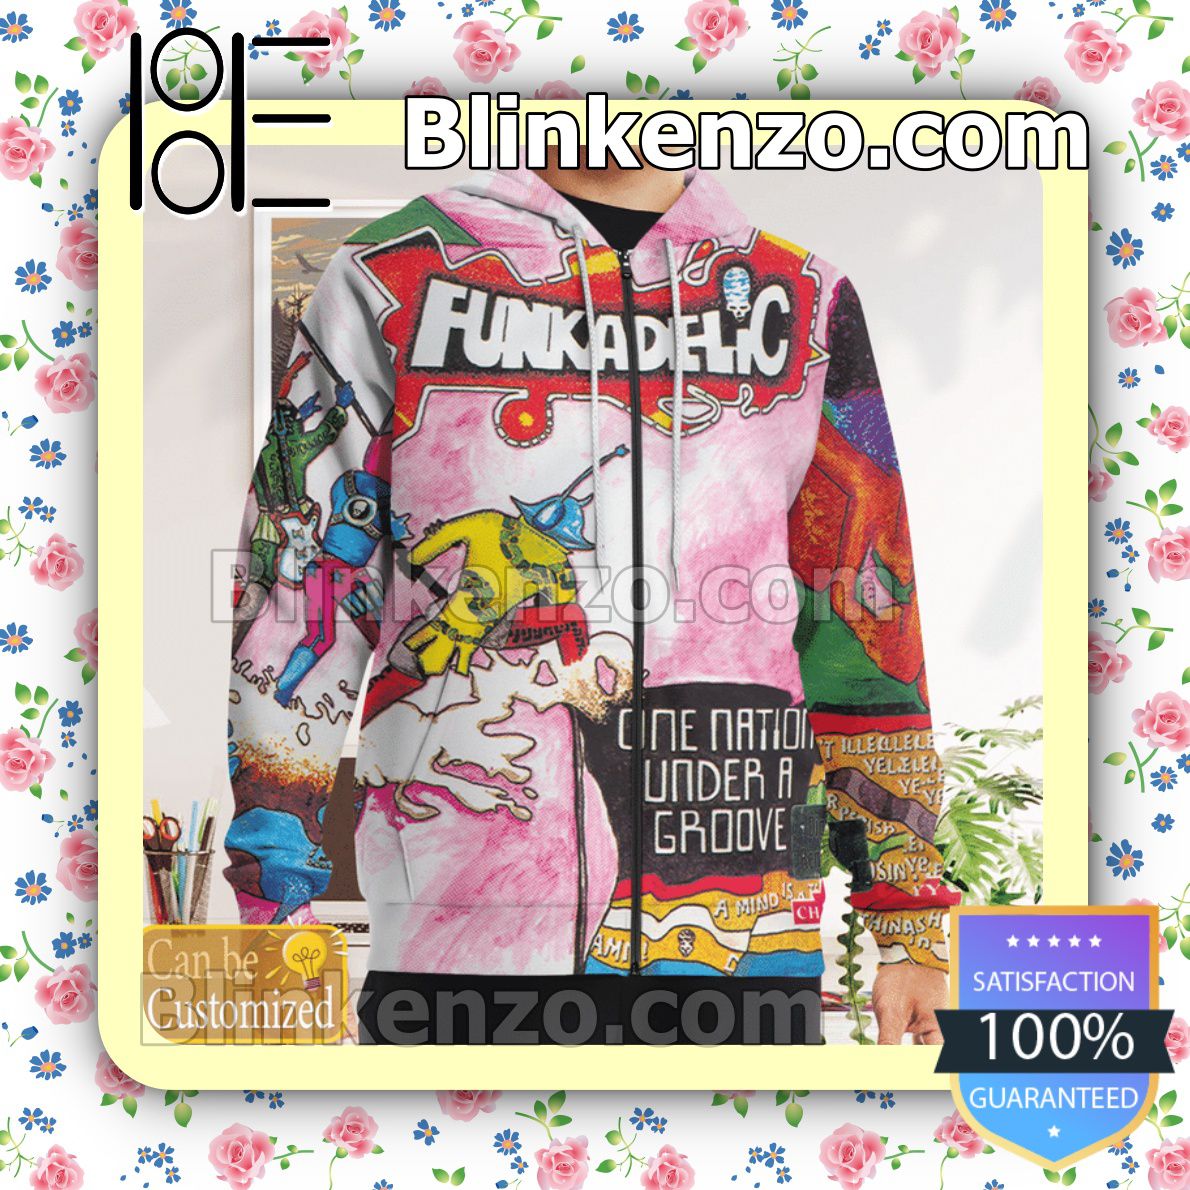 Personalized Funkadelic One Nation Under A Groove Album Cover Hooded Sweatshirt